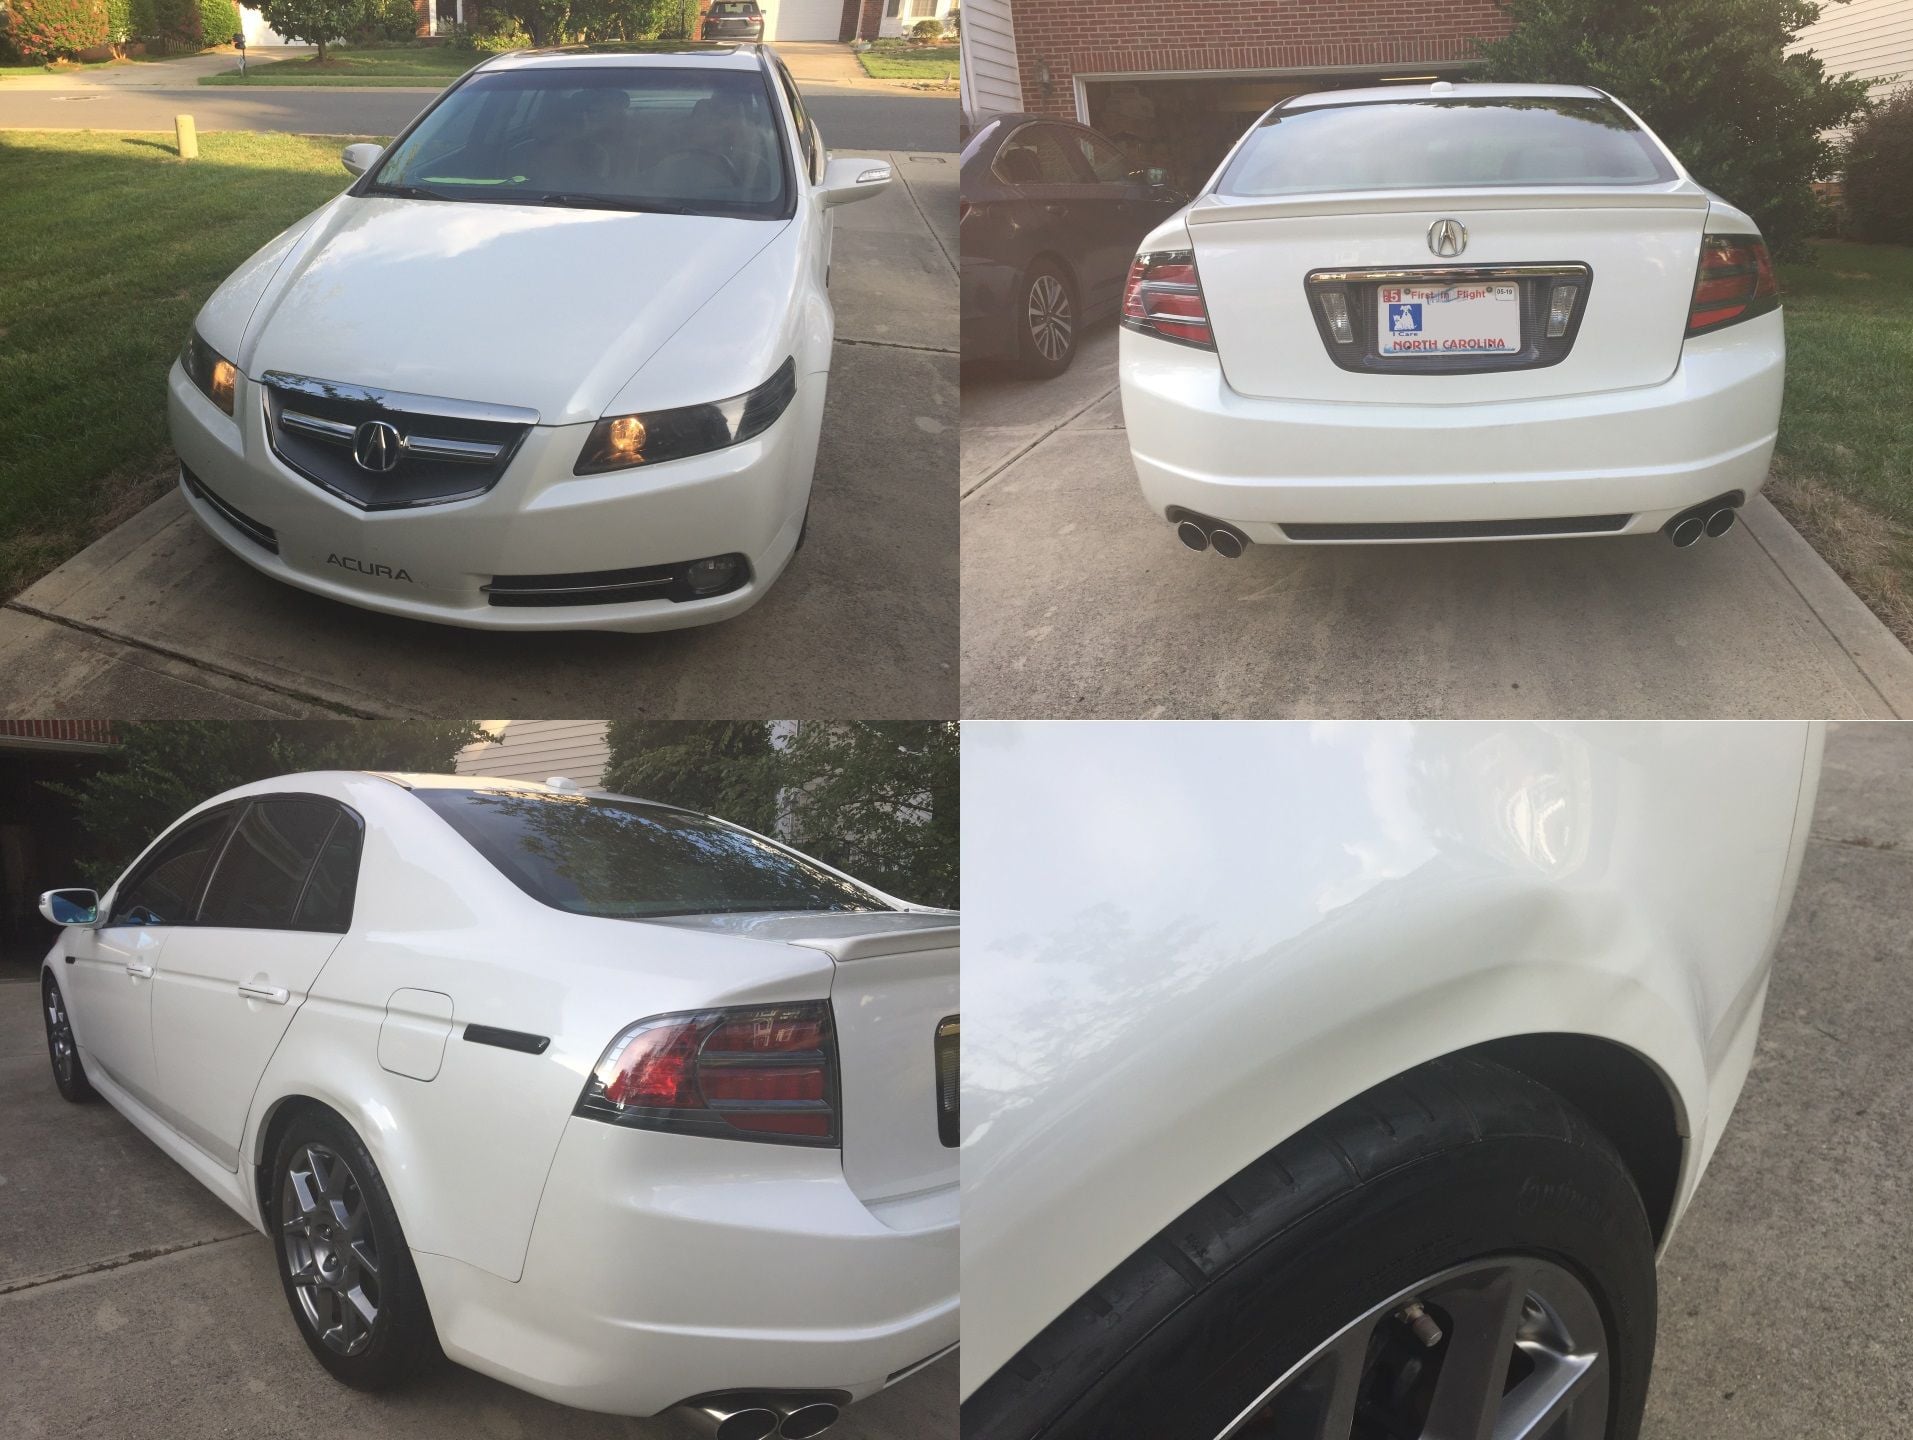 2007 Acura TL - SOLD: Bearcat94's 2007 TL Type-S For Sale (Price Reduced) - SOLD - Used - VIN 19UUA76597A009621 - 107,500 Miles - 6 cyl - 2WD - Automatic - Sedan - White - Charlotte, NC 28277, United States